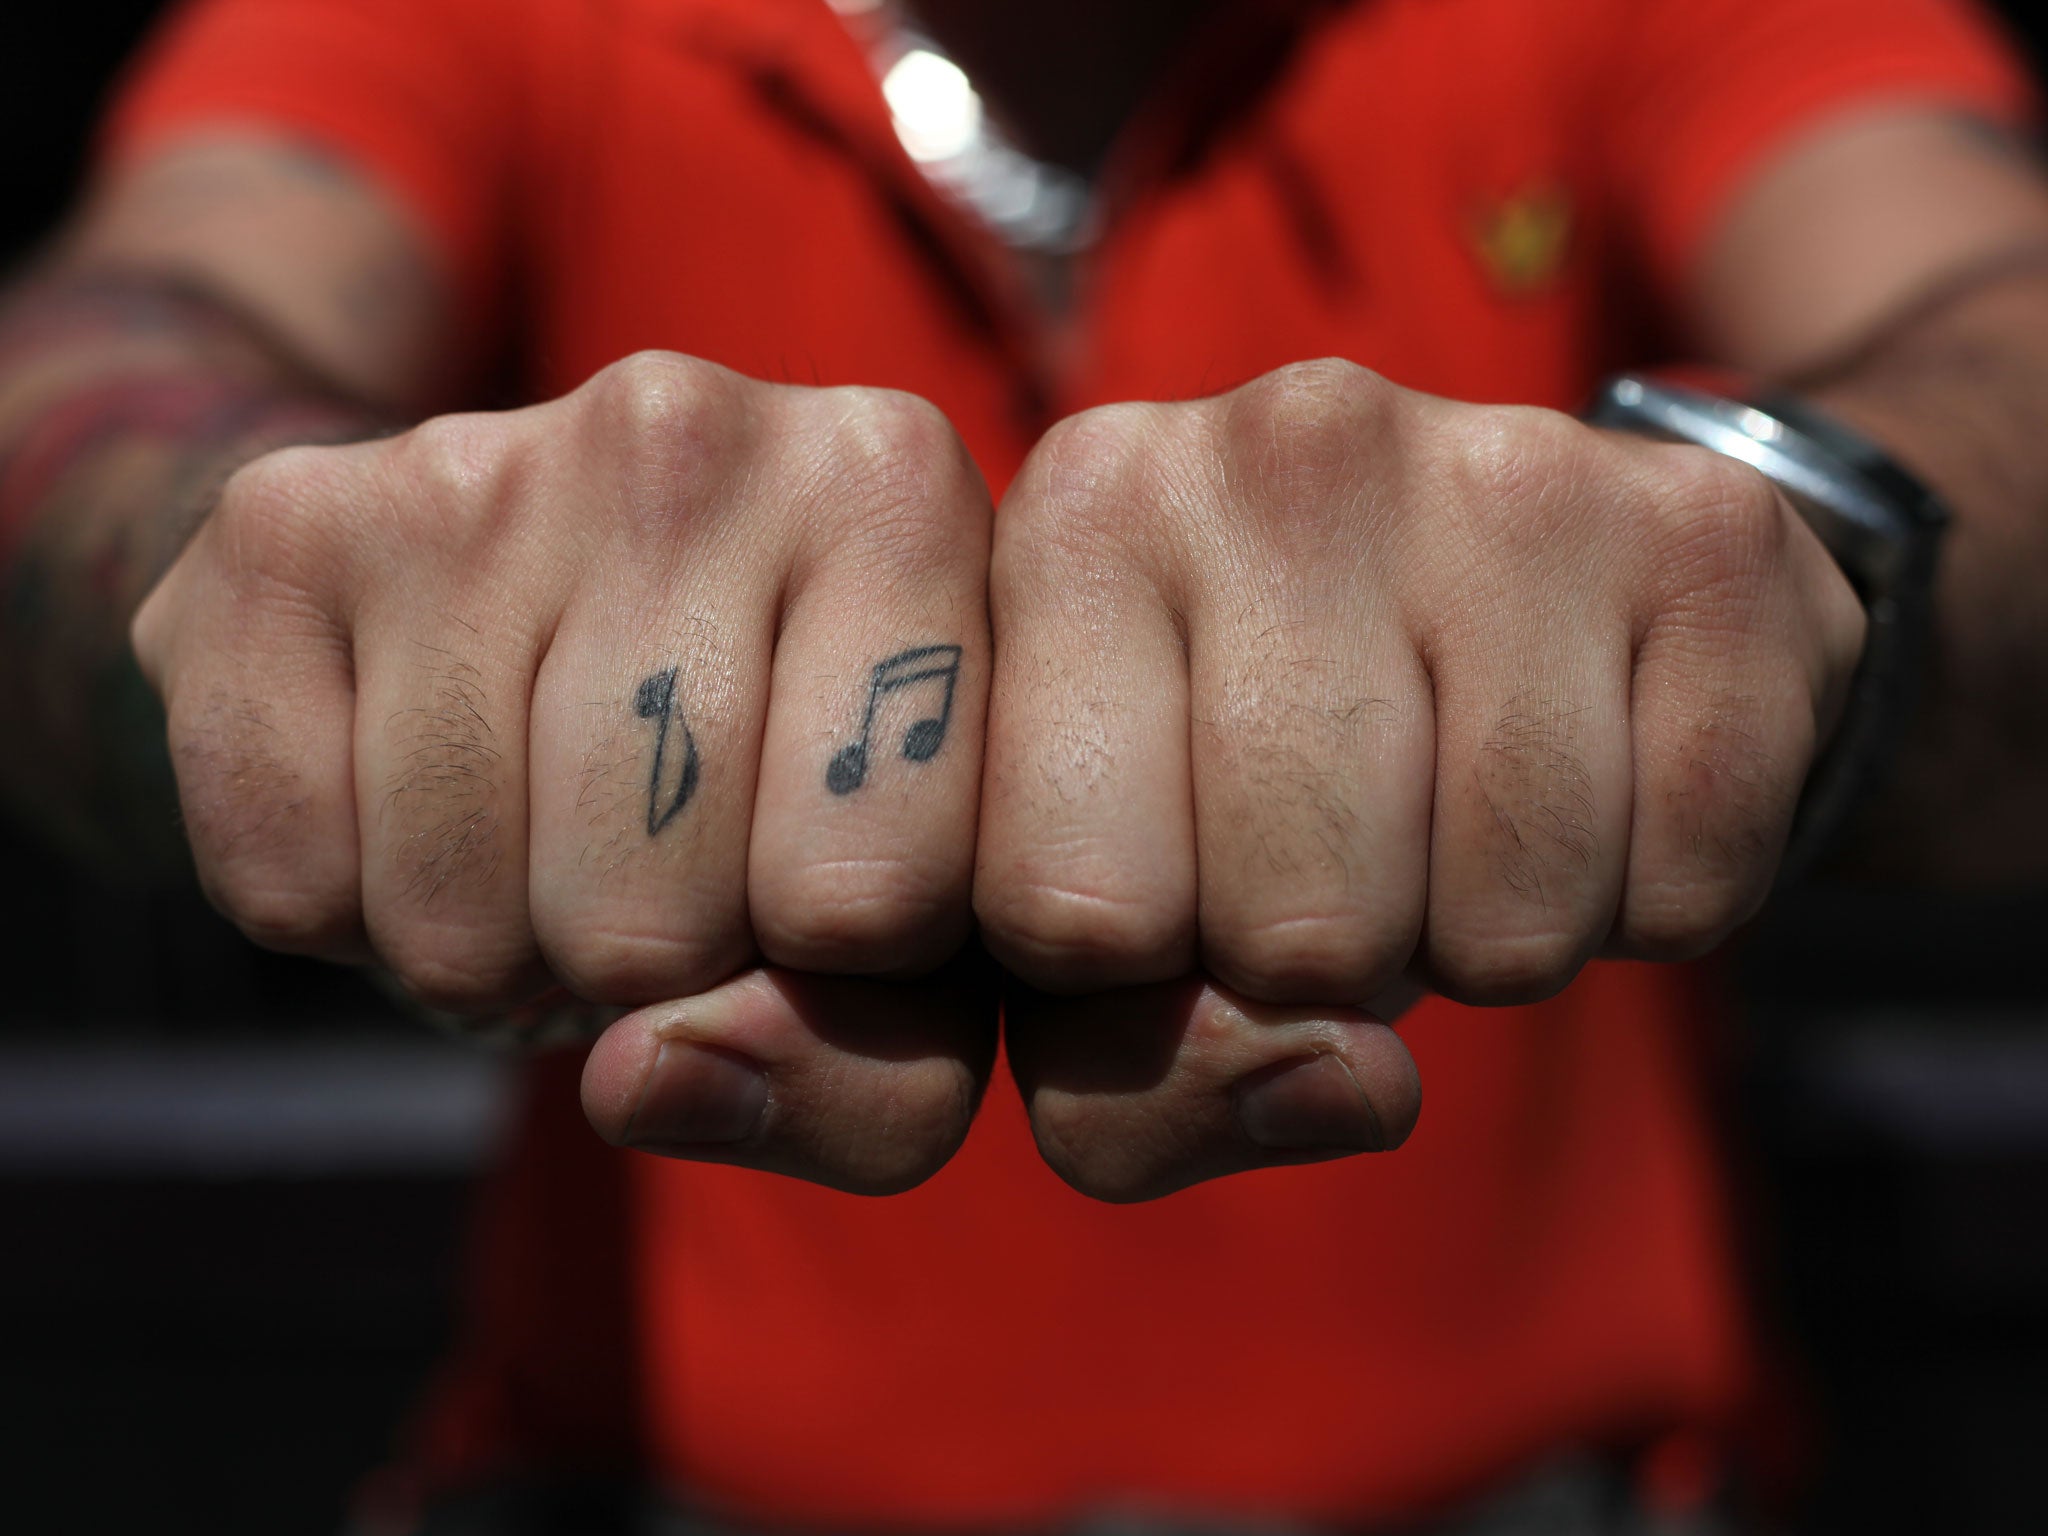 Knuckle Tattoo  photos from Dave Lopez the loft photograph  Aaron  Irizarry  Flickr